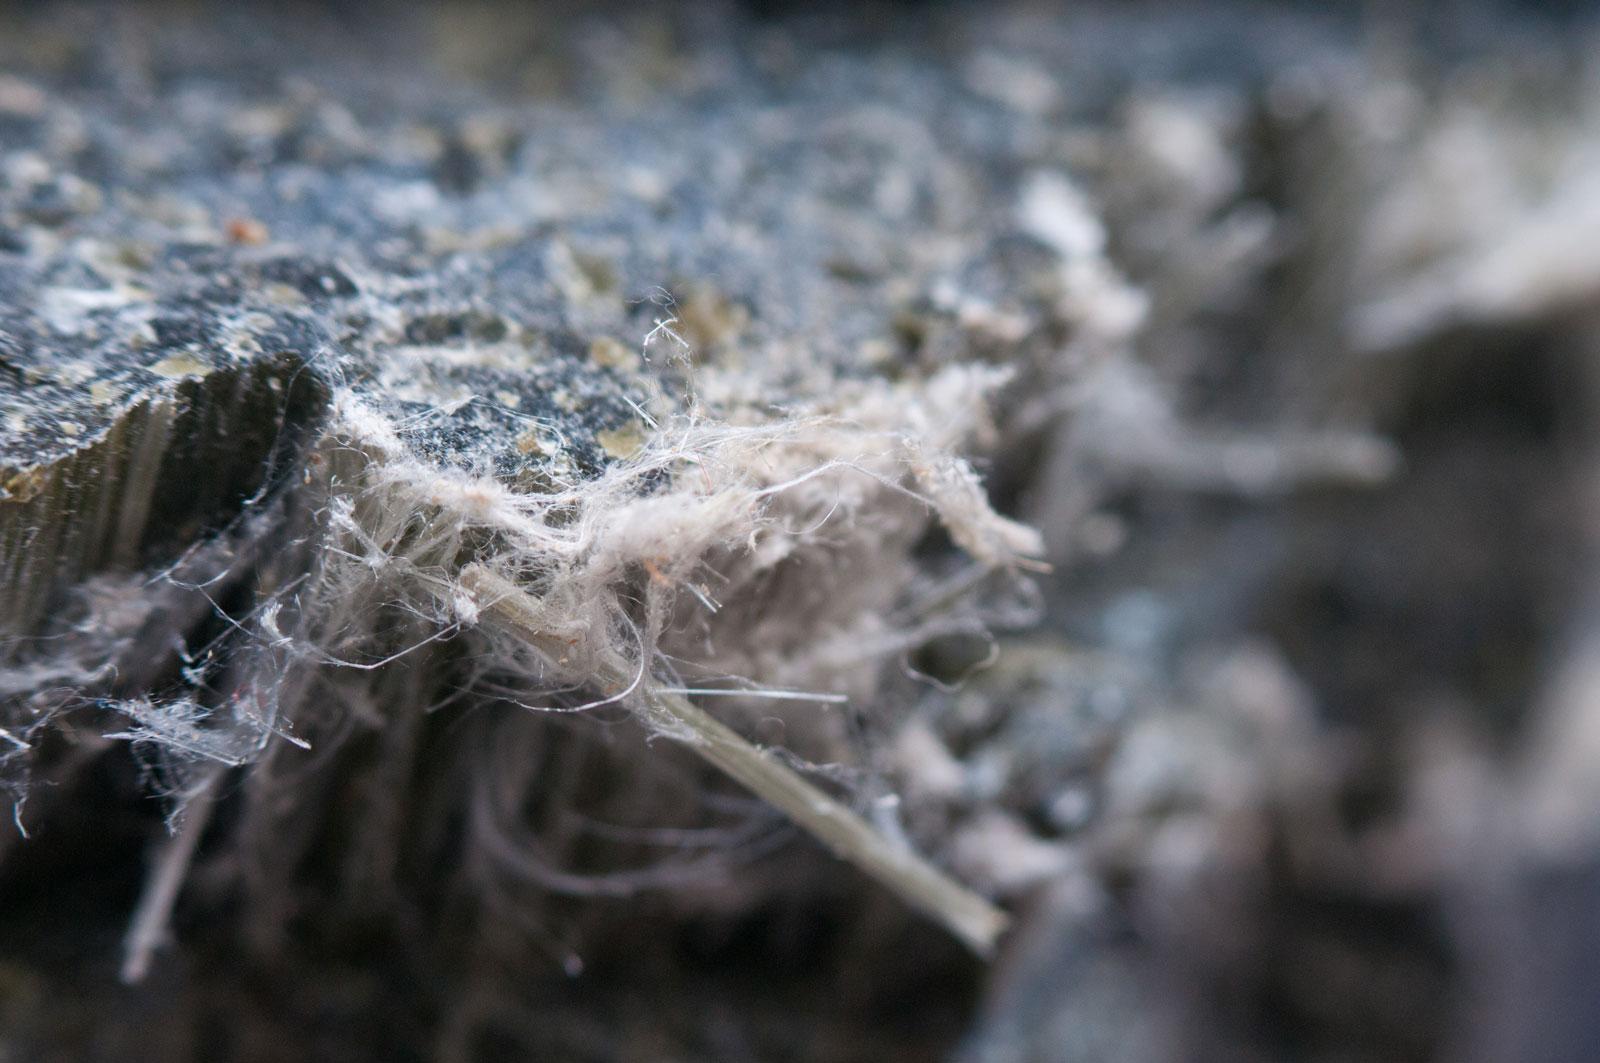 Strands of asbestos chrysotile fibres which can cause lung disease.